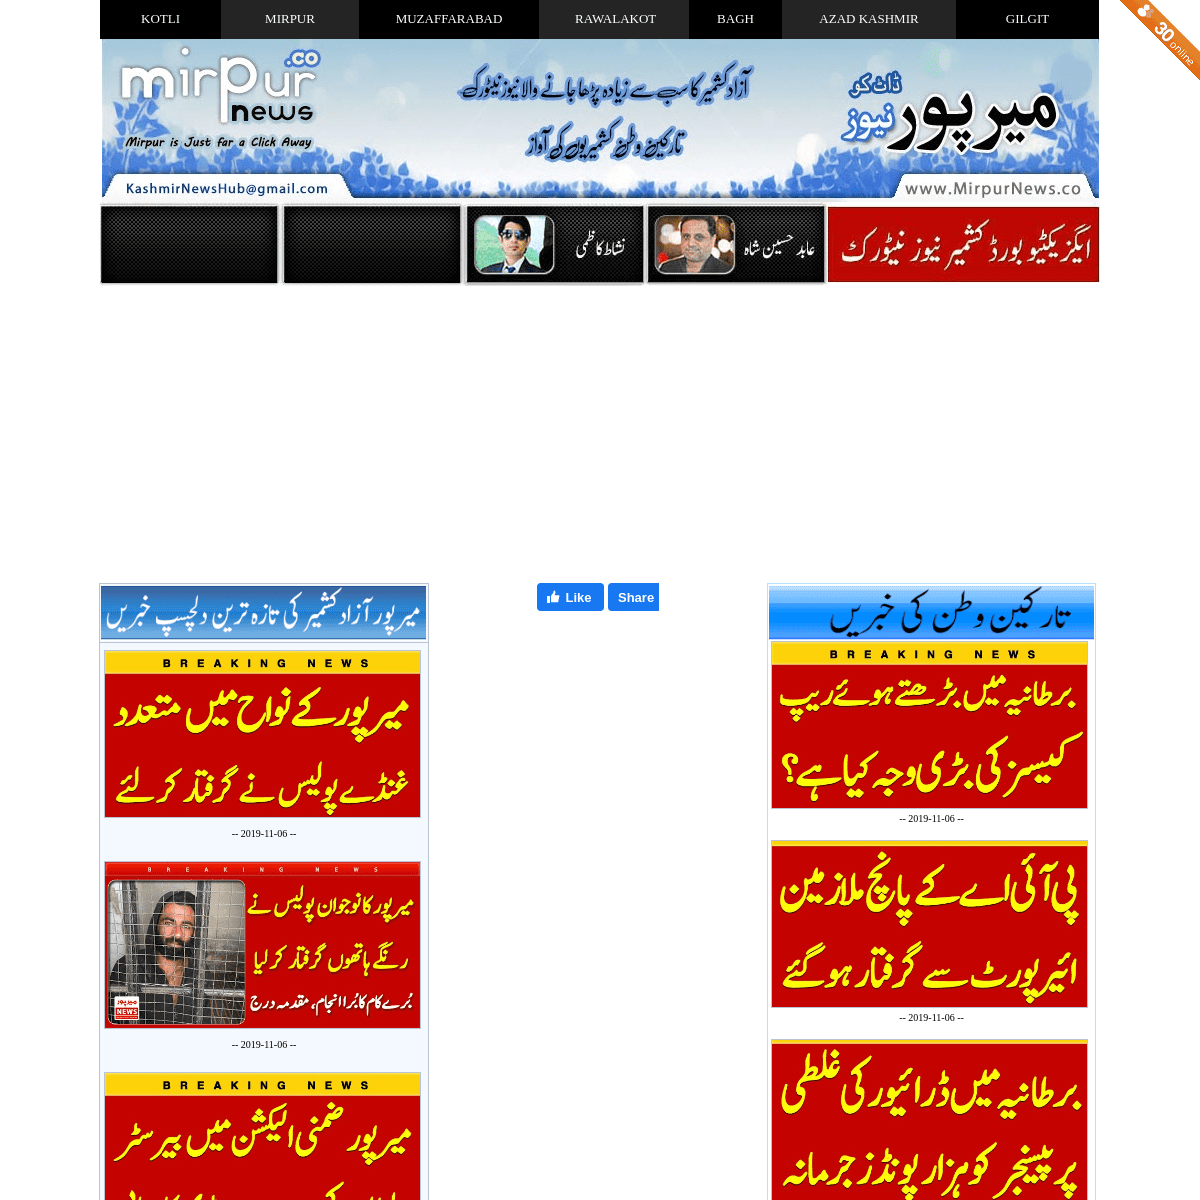 A complete backup of mirpurnews.net